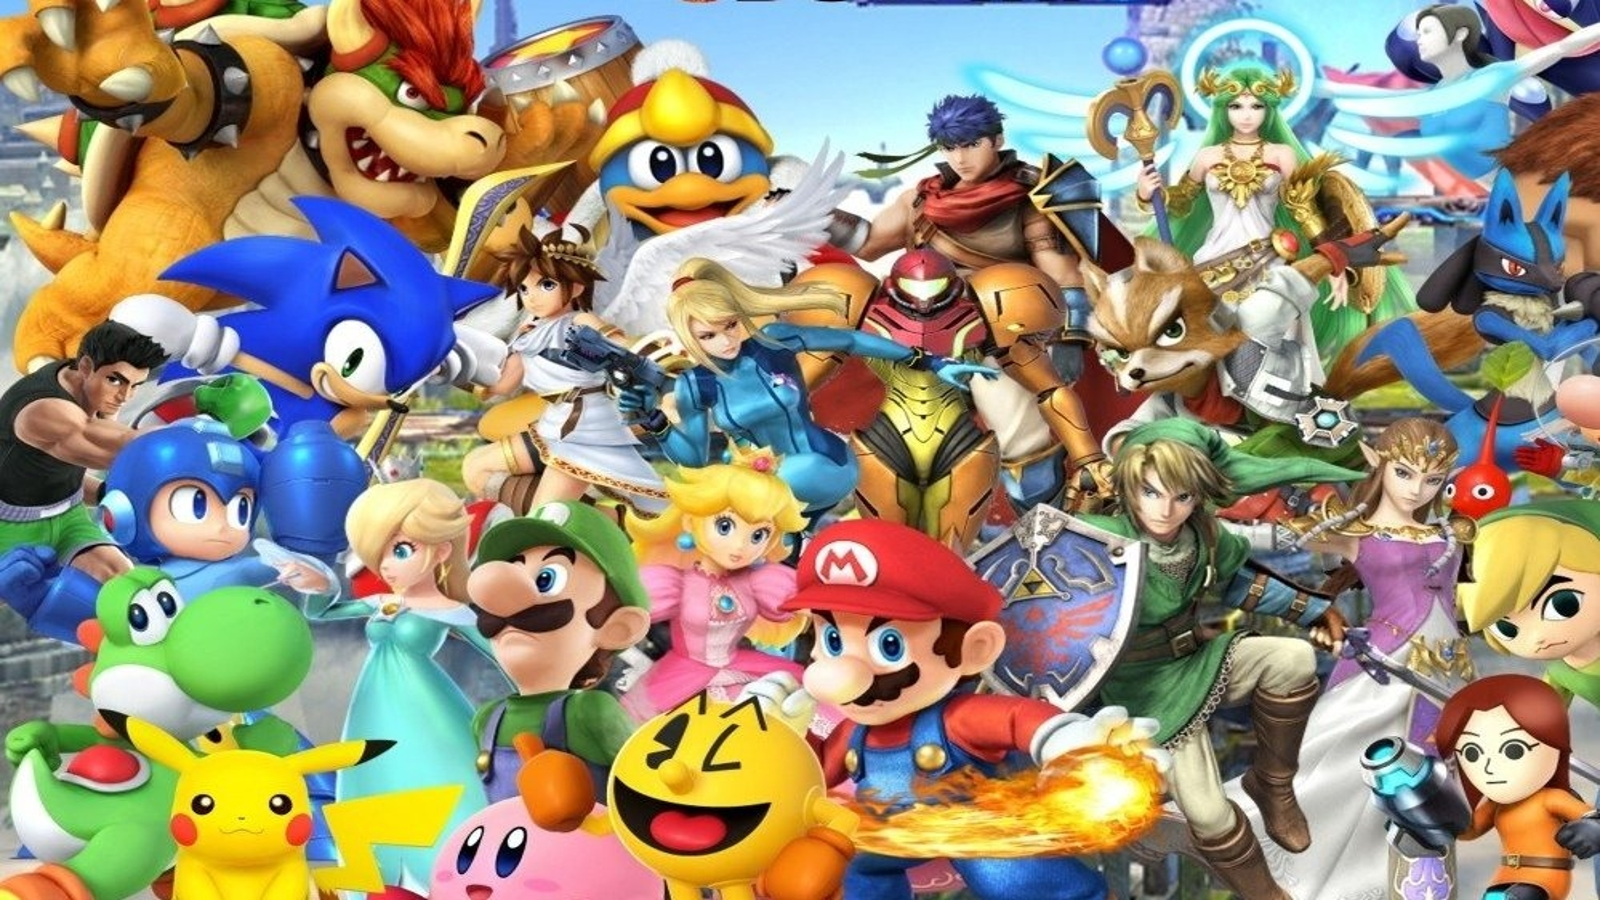 Super Smash Brothers Ultimate review: Everyone is here, and balanced - CNET